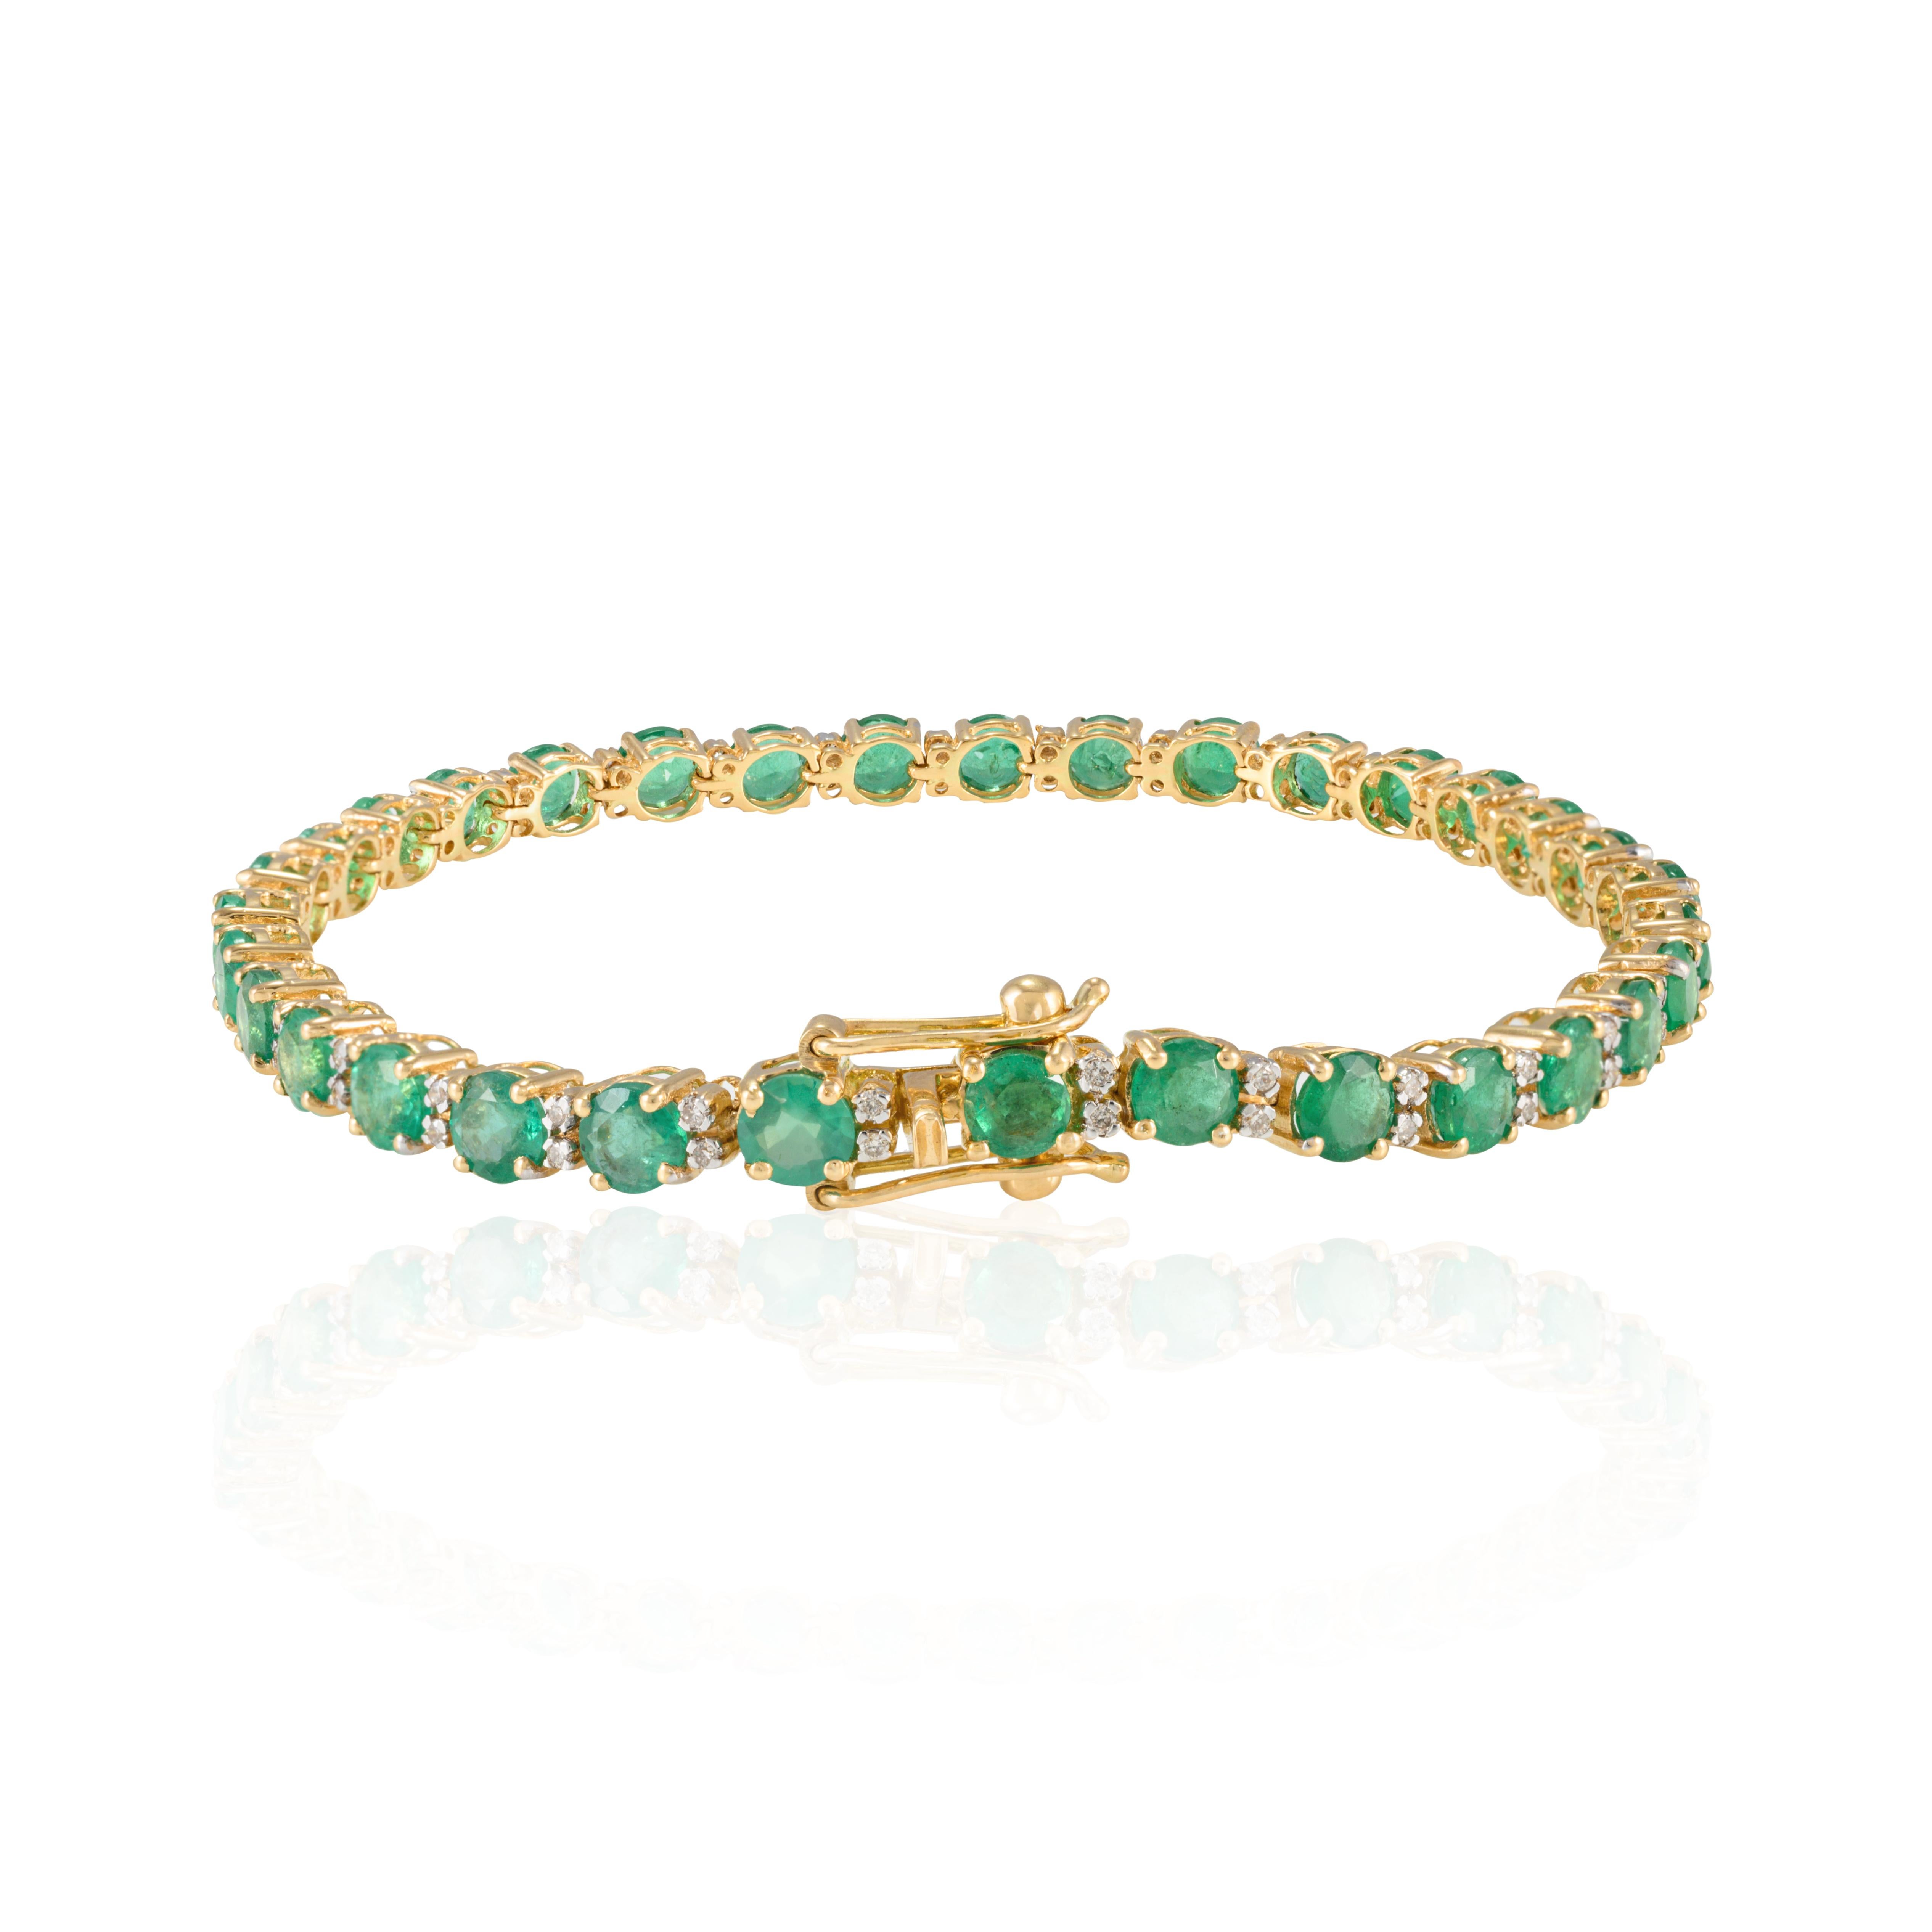 This 7.9 CTW Round Emerald Diamond Tennis Bracelet in 18K gold showcases endlessly sparkling natural emerald, weighing 7.9 carat and diamonds weighing 0.33 carat. It measures 7 inches long in length. 
Emerald enhances intellectual capacity of the